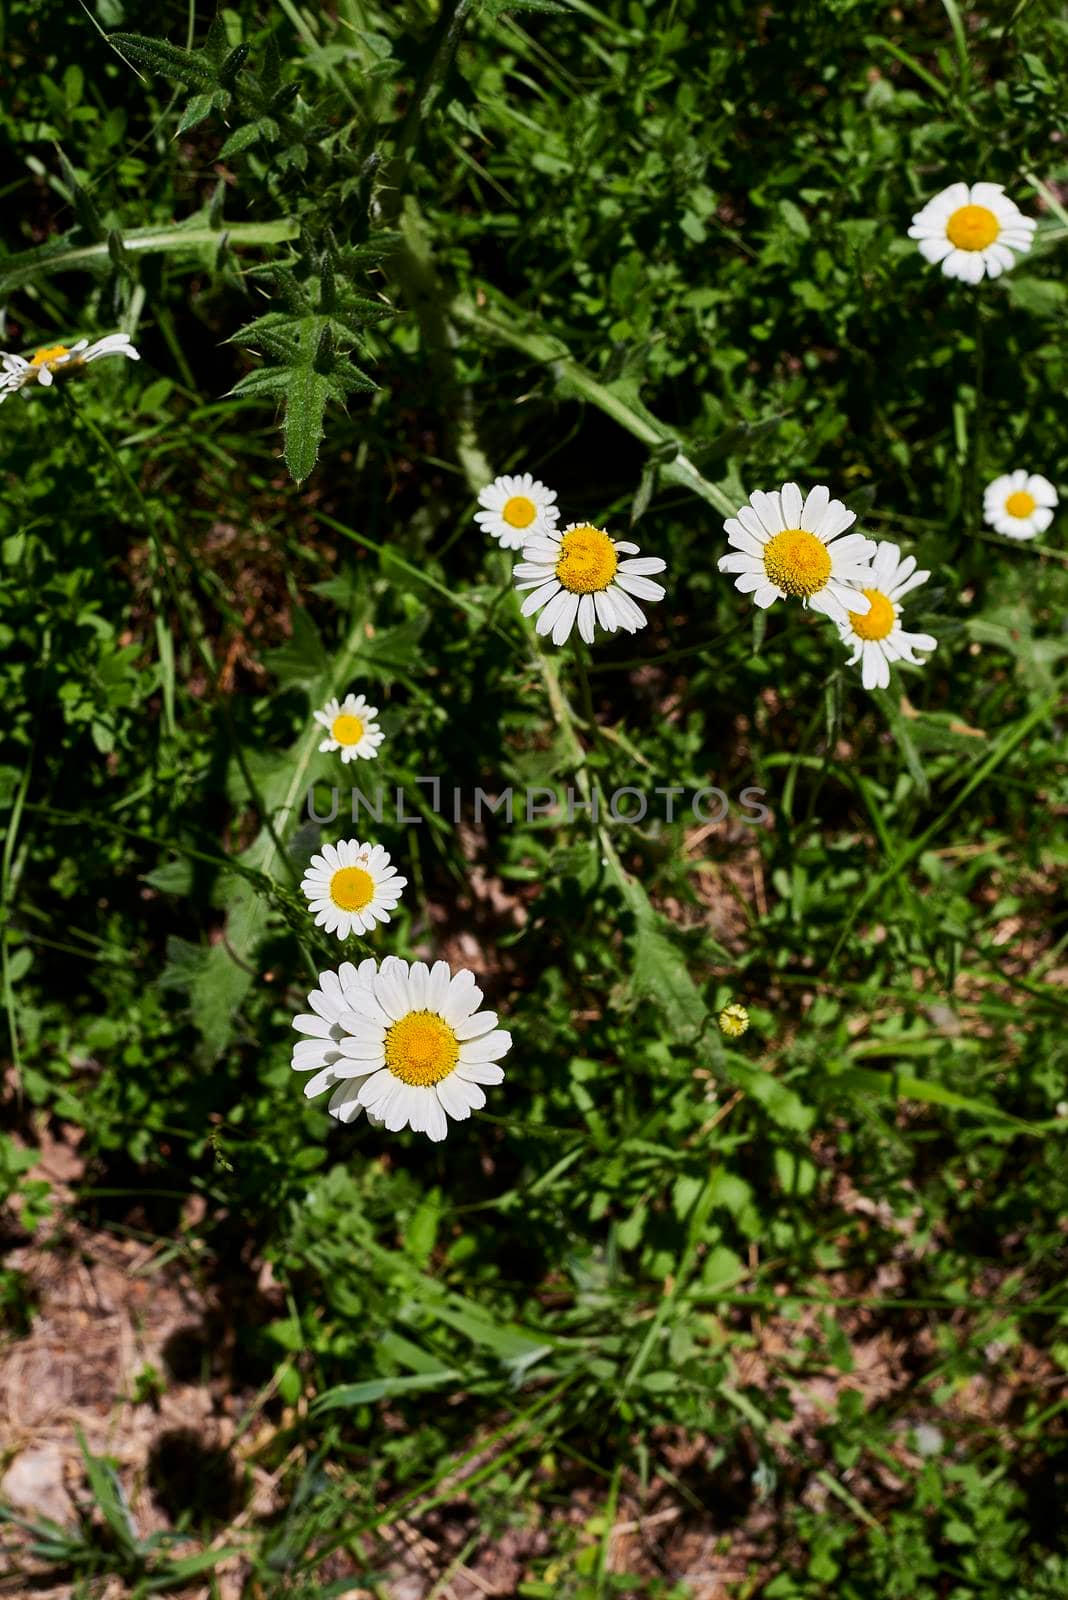 Group of flowers, daisies, out of focus background, macro and detail photography.